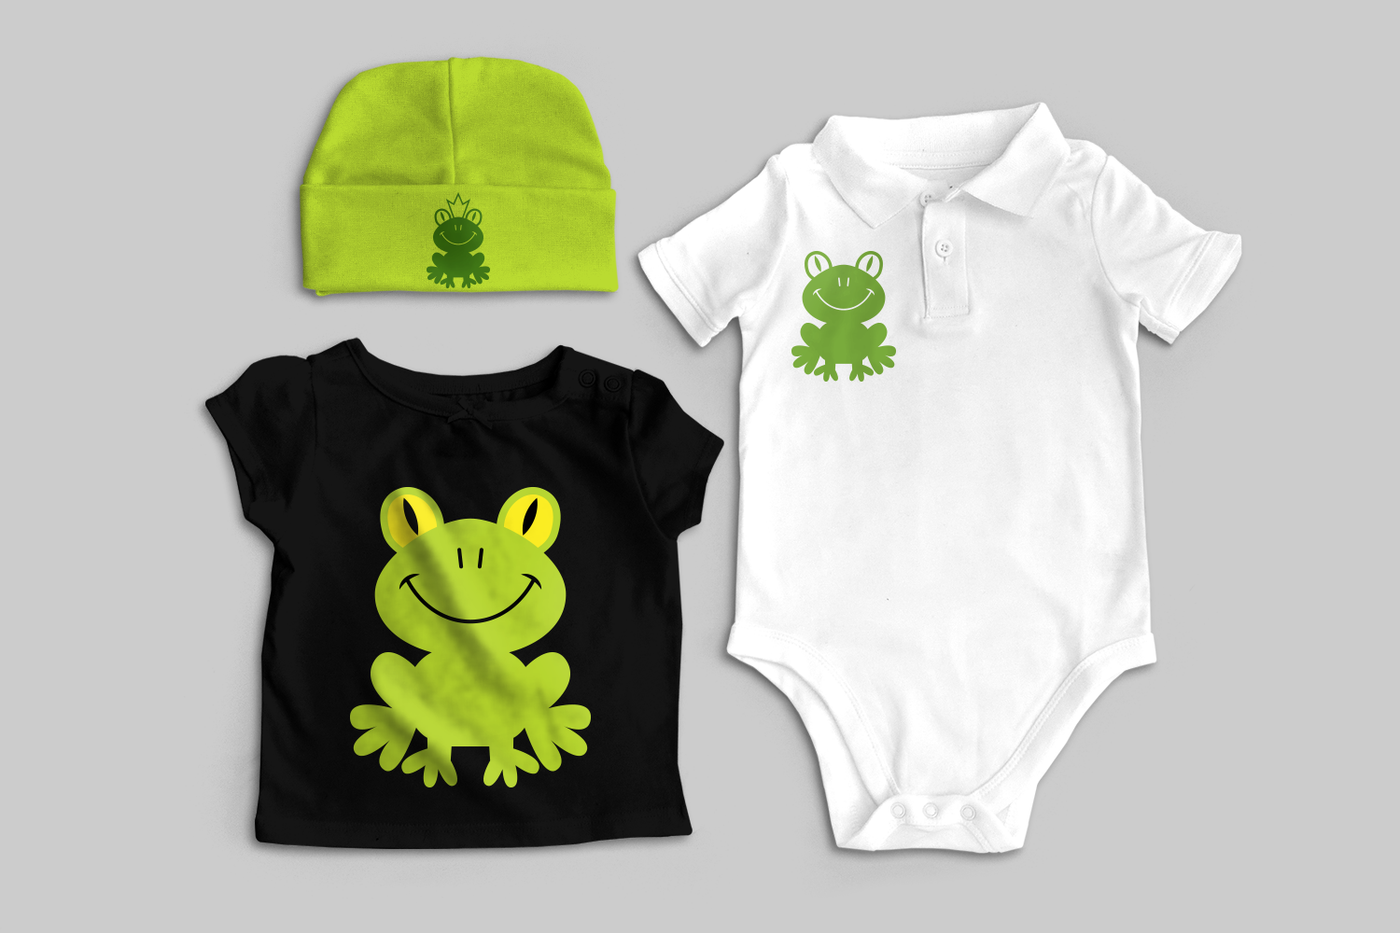 Baby clothes, each with a frog design.